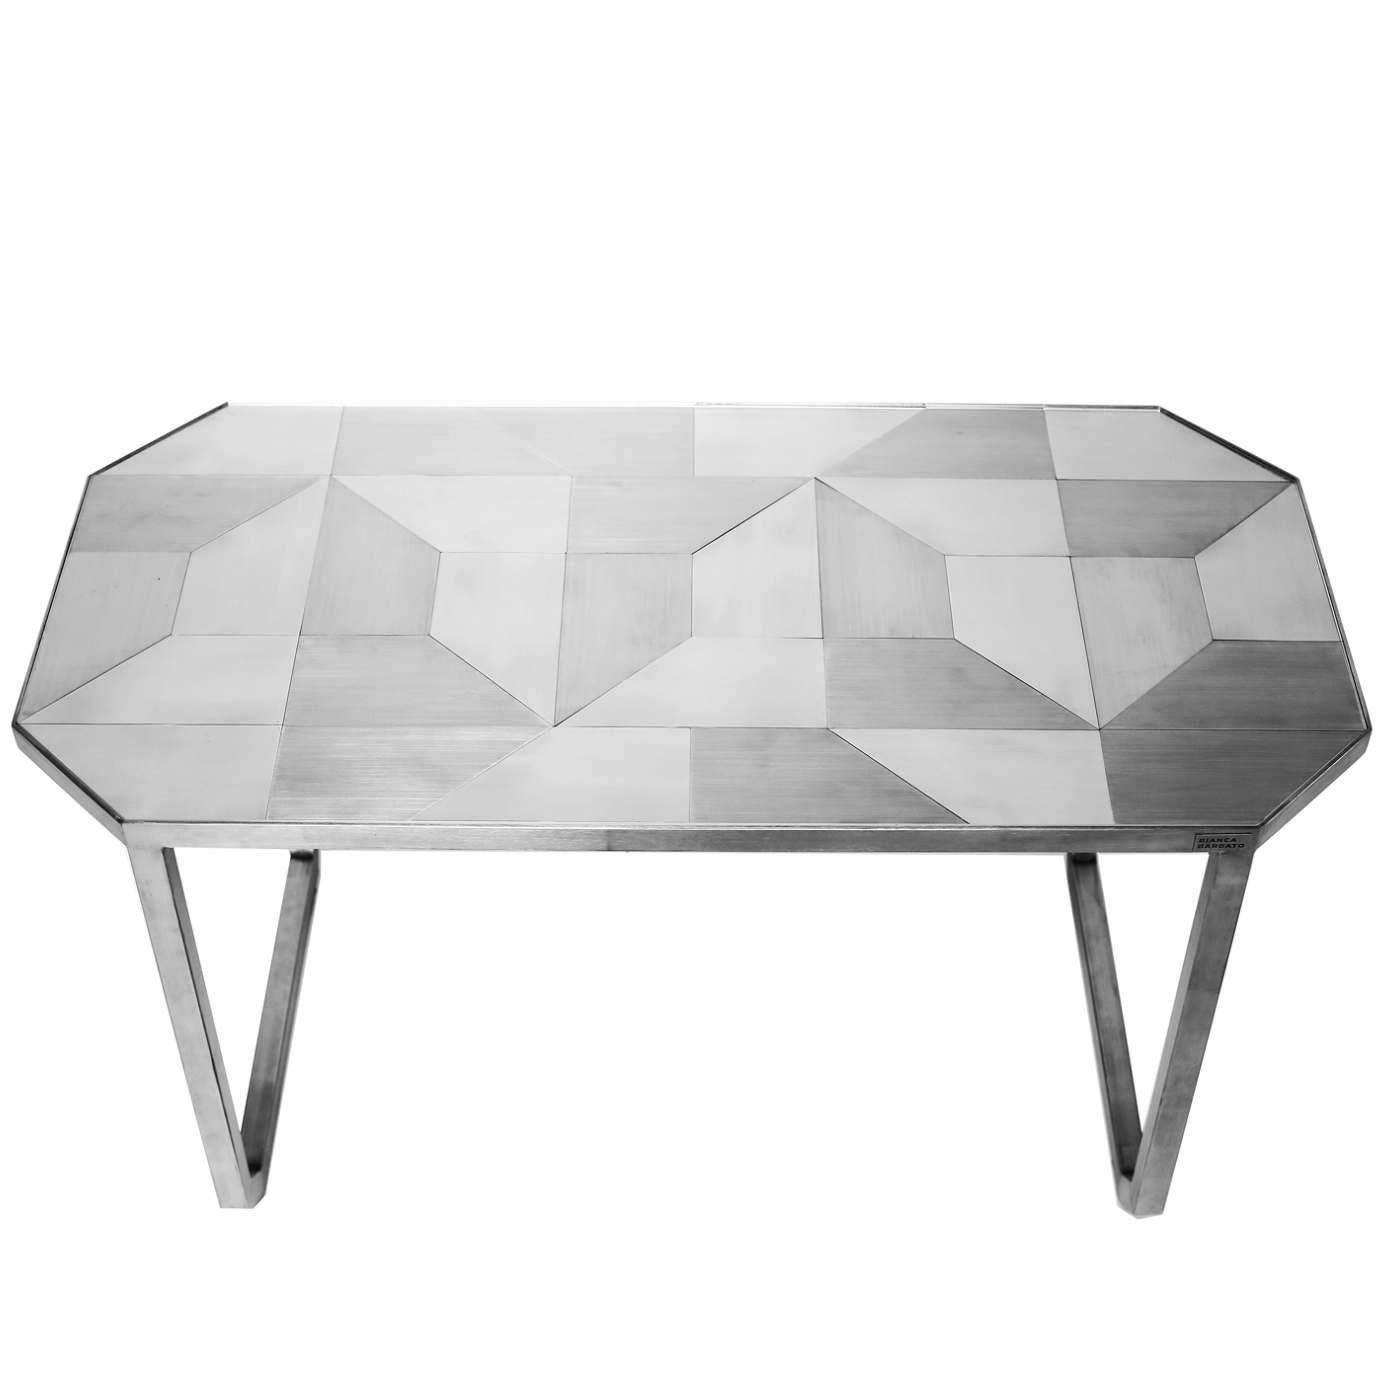 'Trama' Coffee Table, Geometric Designs in Stainless Steel Inox Tiles For Sale